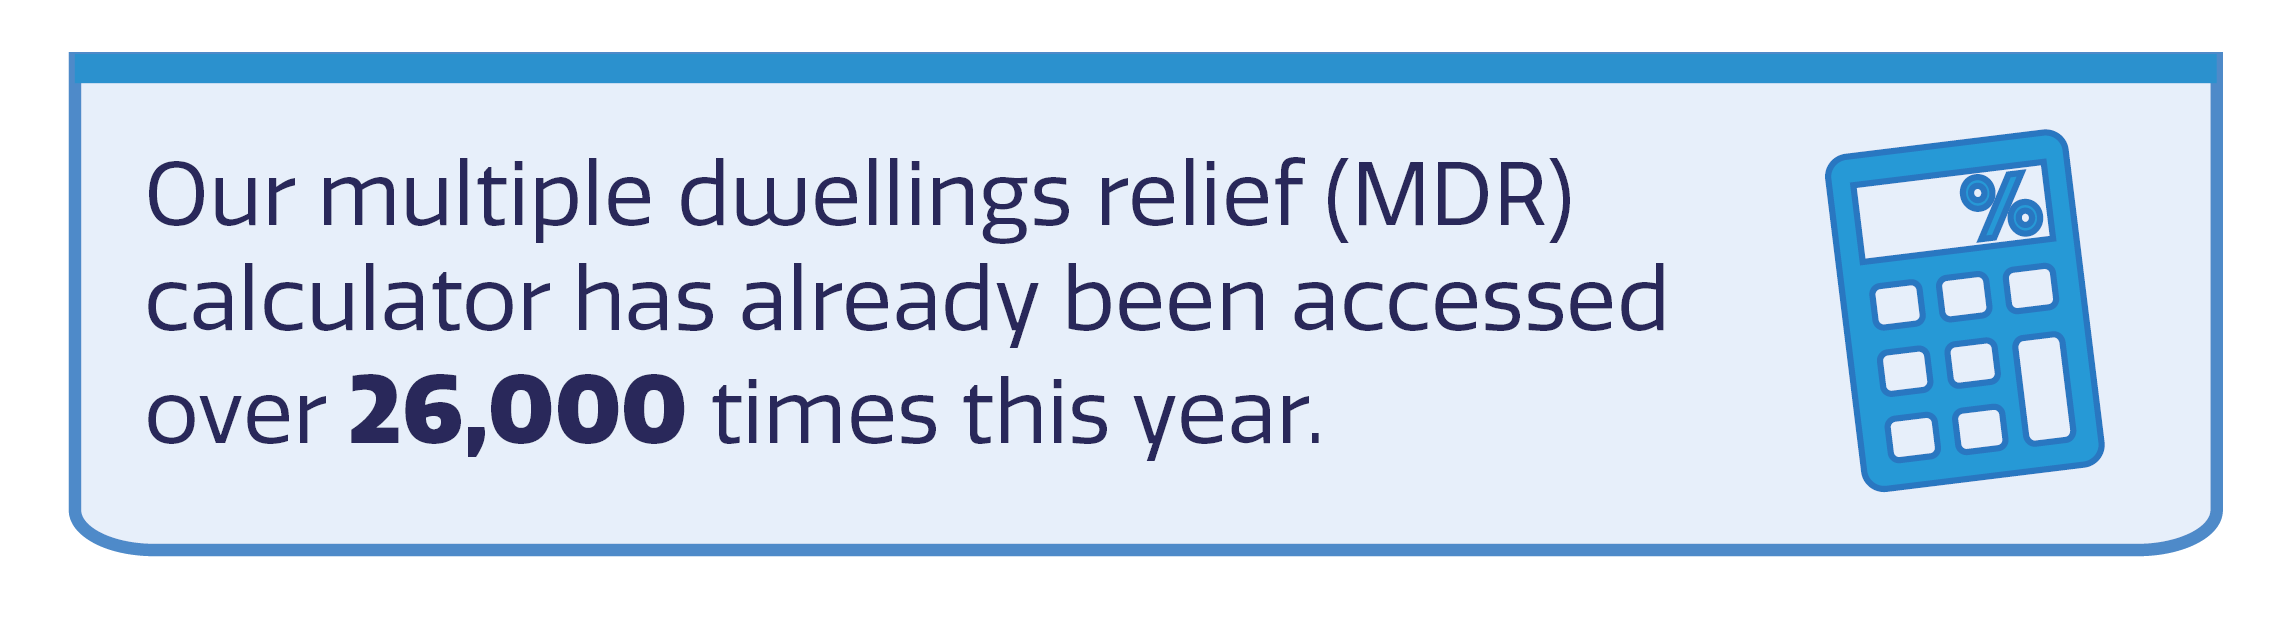 Blue calculator icon with text: 'Our multiple dwellings relief (MDR) calculator has already been accessed over 26,000 times this year.'